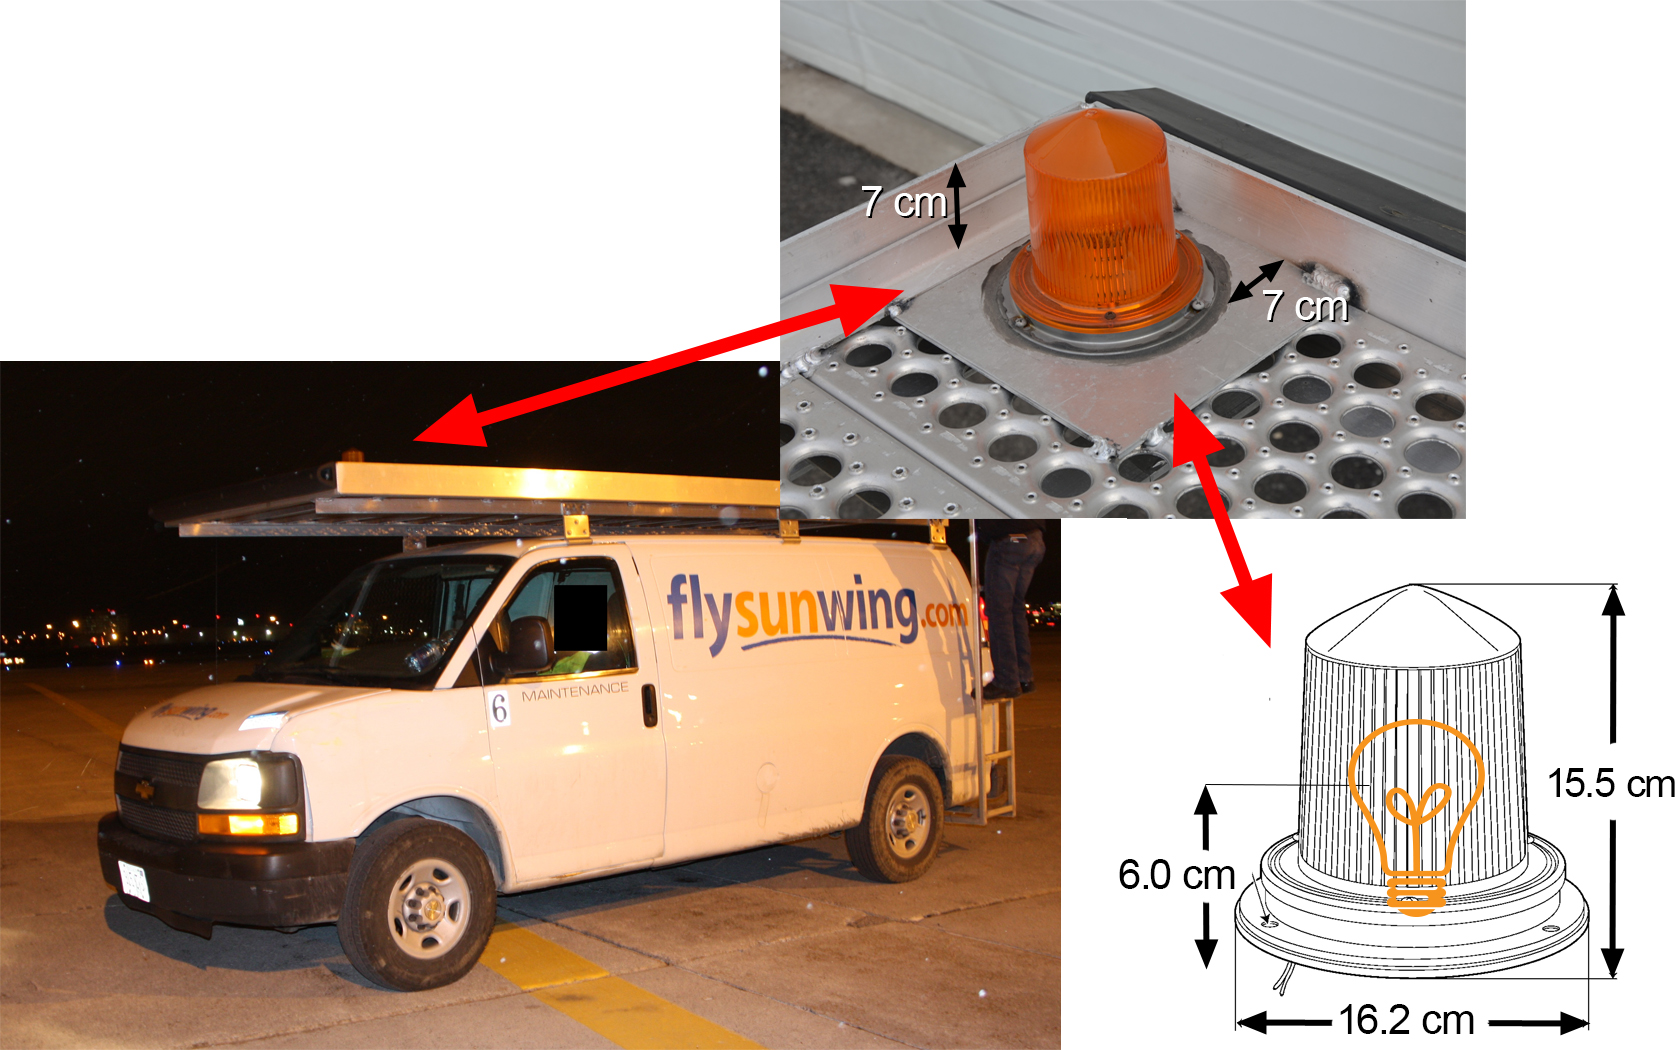 Graphic of grote beacon light installation on the maintenance van, described in text